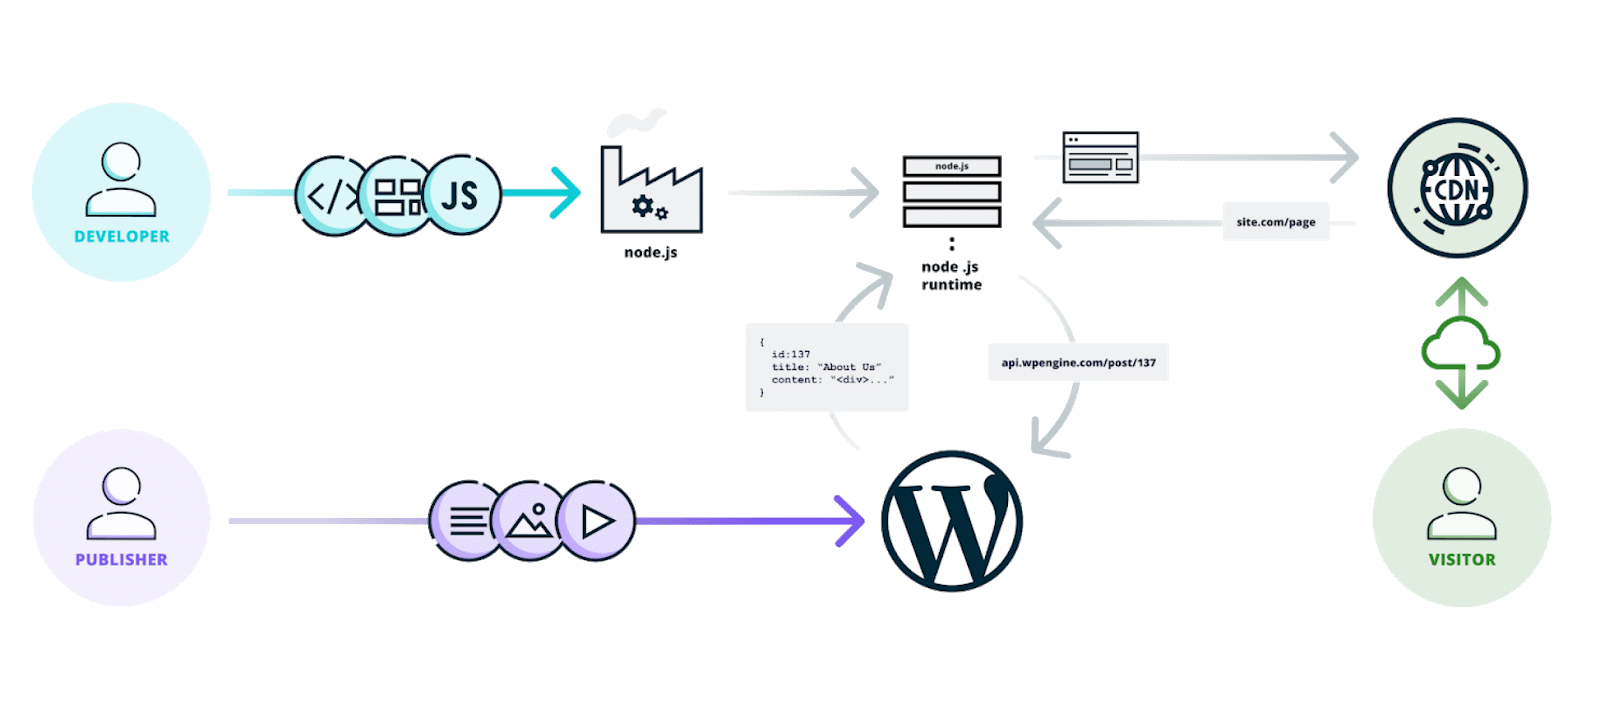 Headless WordPress provides developers with a flexible, decoupled architecture so they can ship features rapidly using the modern tools they prefer